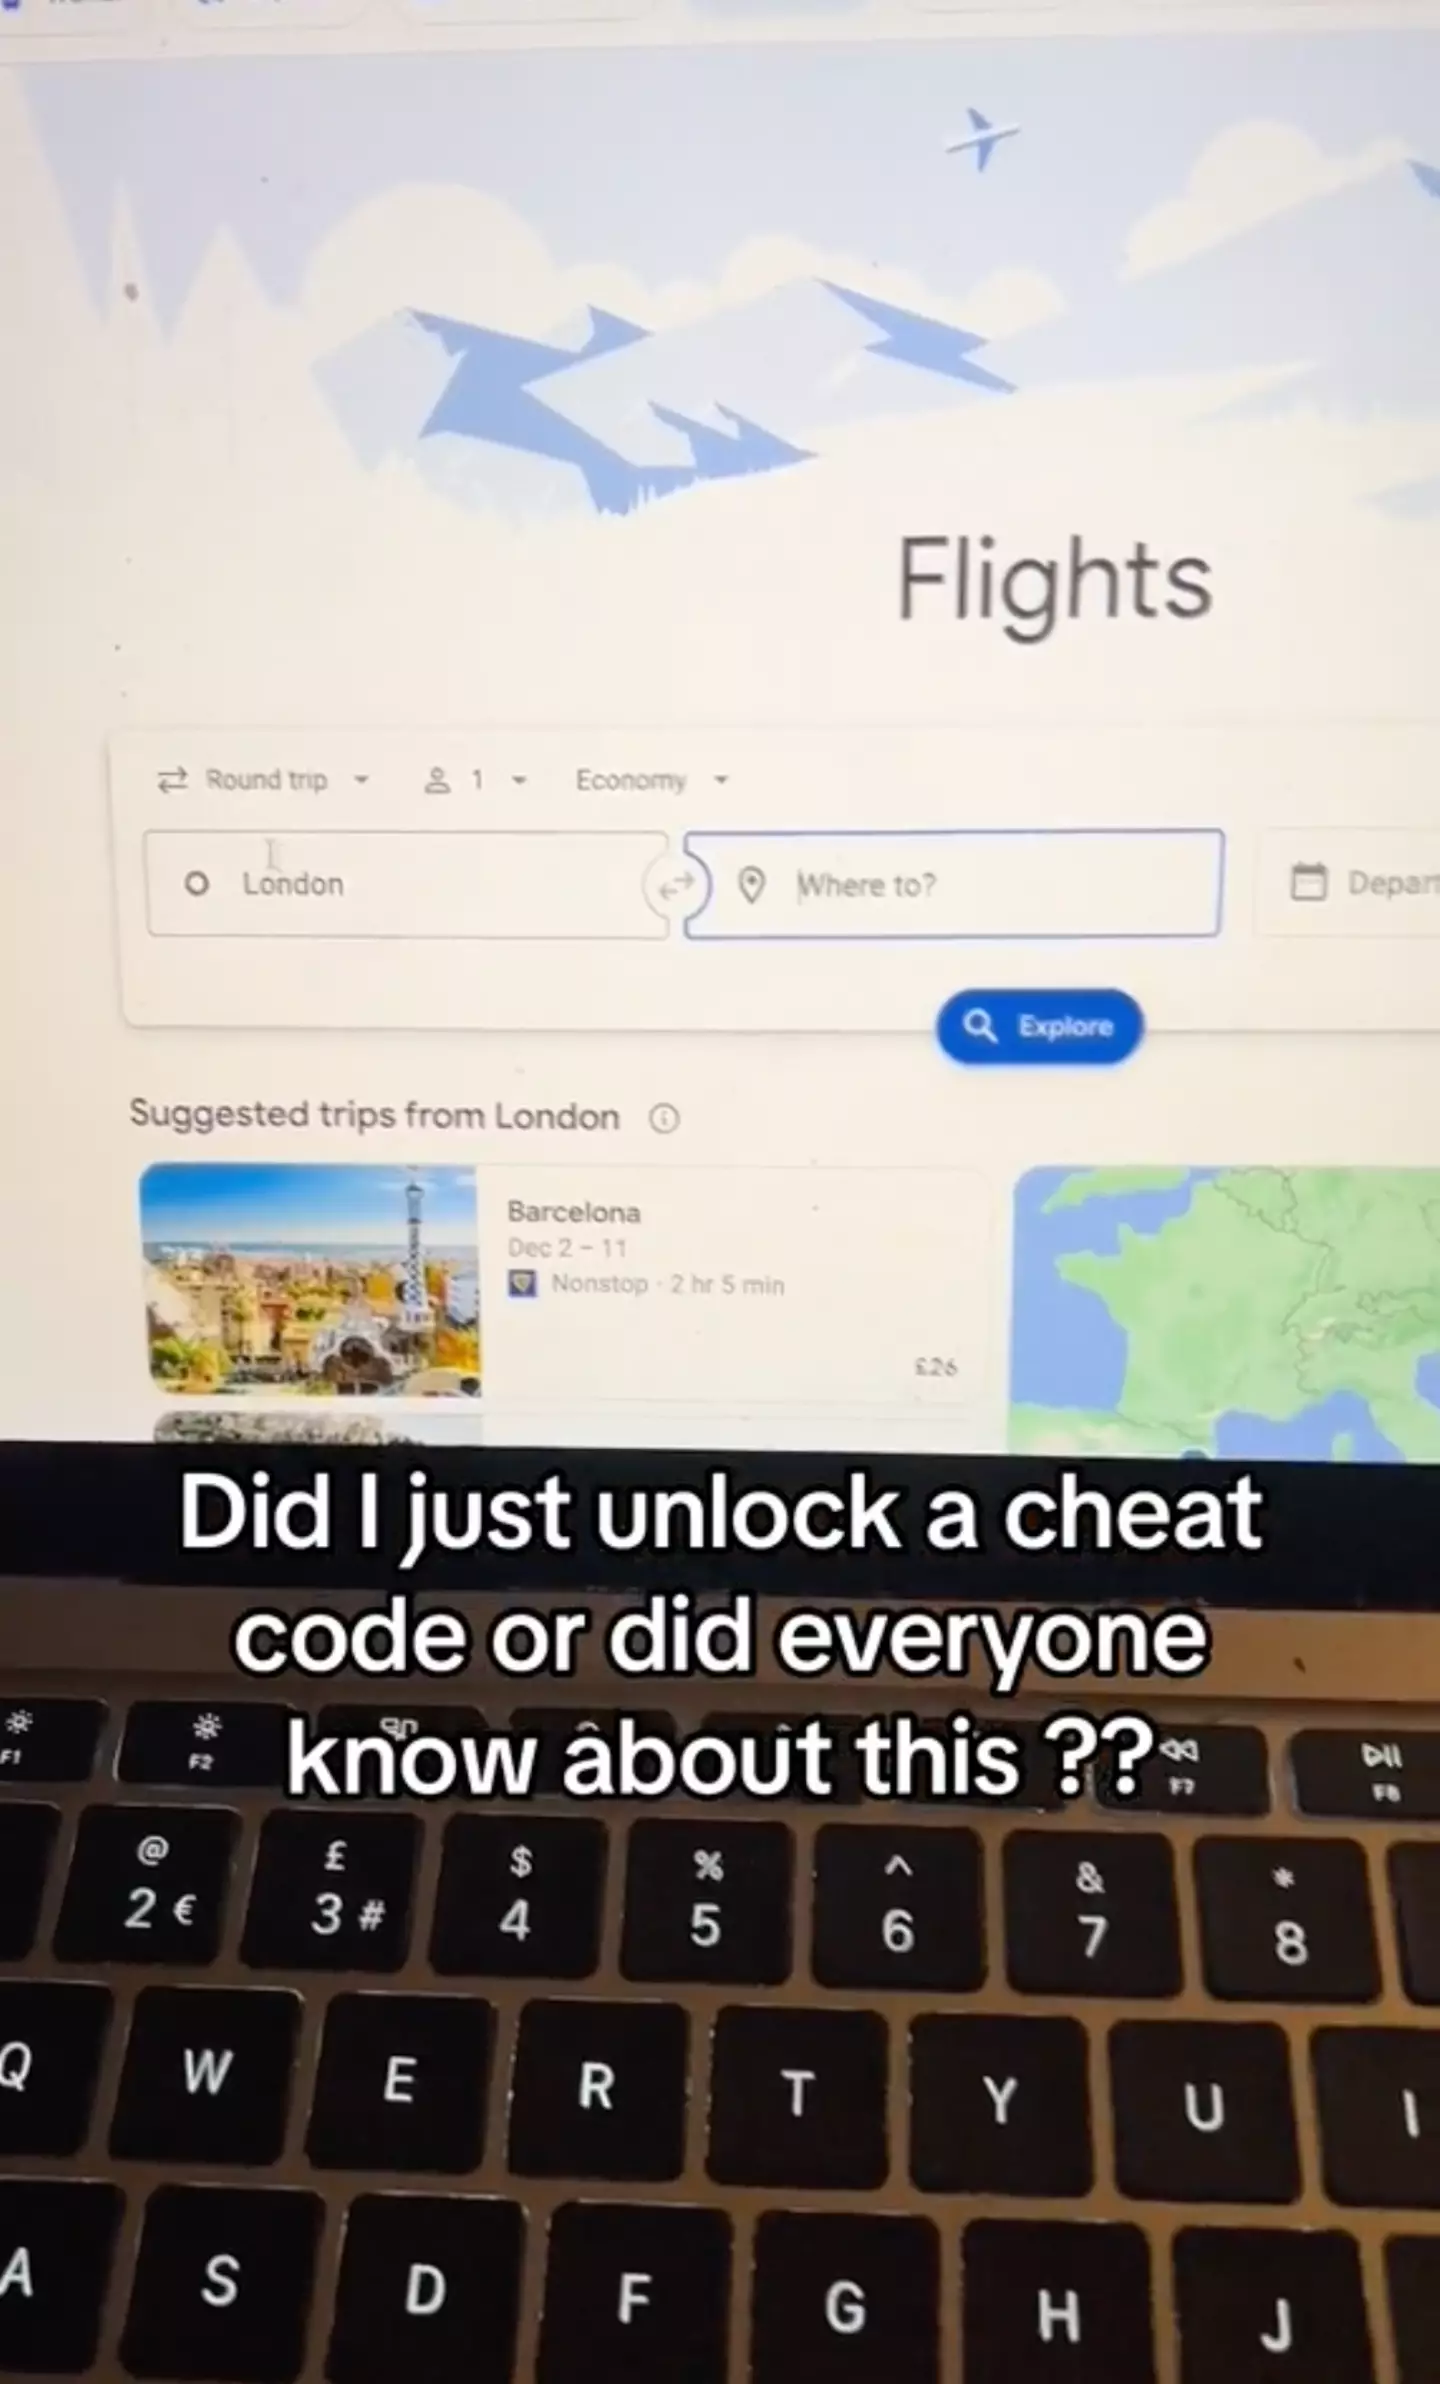 The simple hack allows you to find cheap flights to any destination.